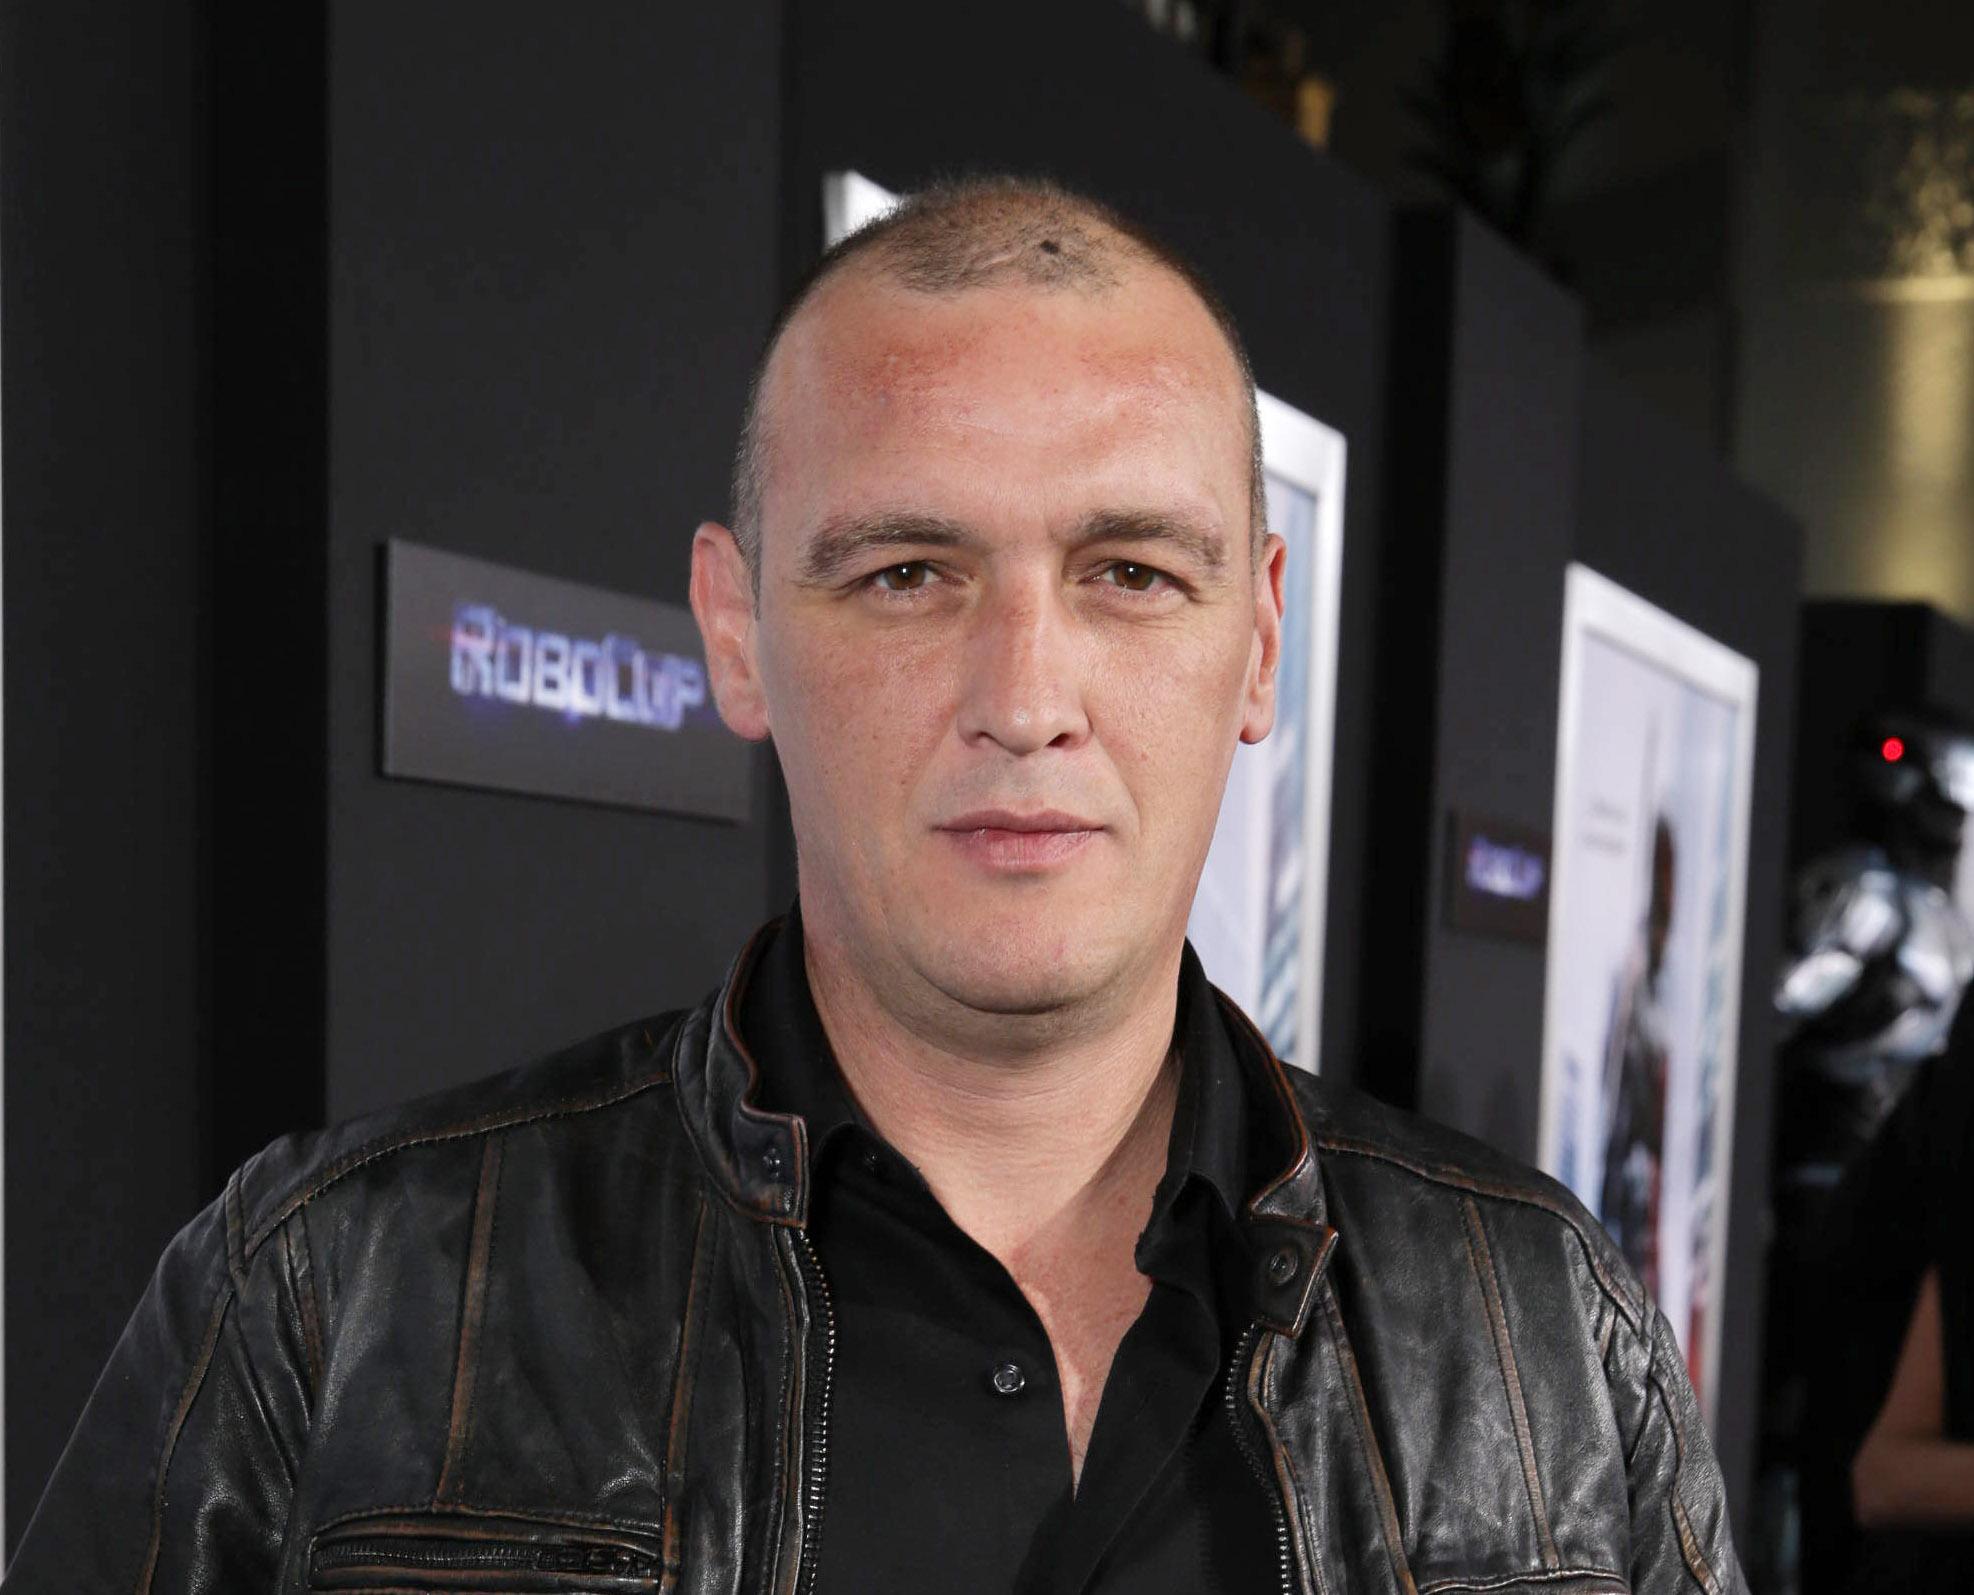 Alan Oneill Dead Sons Of Anarchy Star Dies Aged 47 The Independent ...